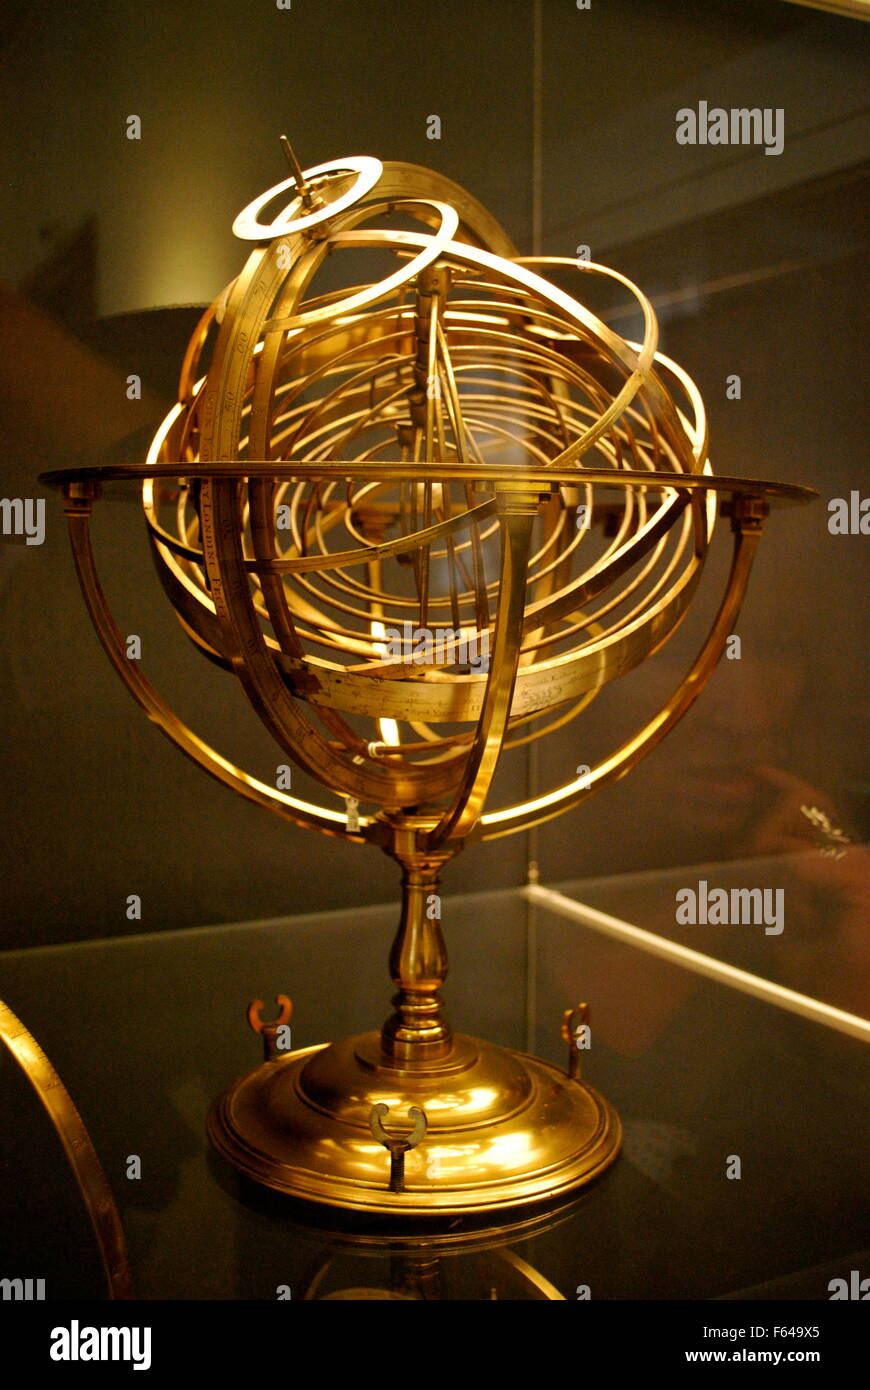 Armillary sphere at the Museum of the History of Science, Oxford, England, UK Stock Photo